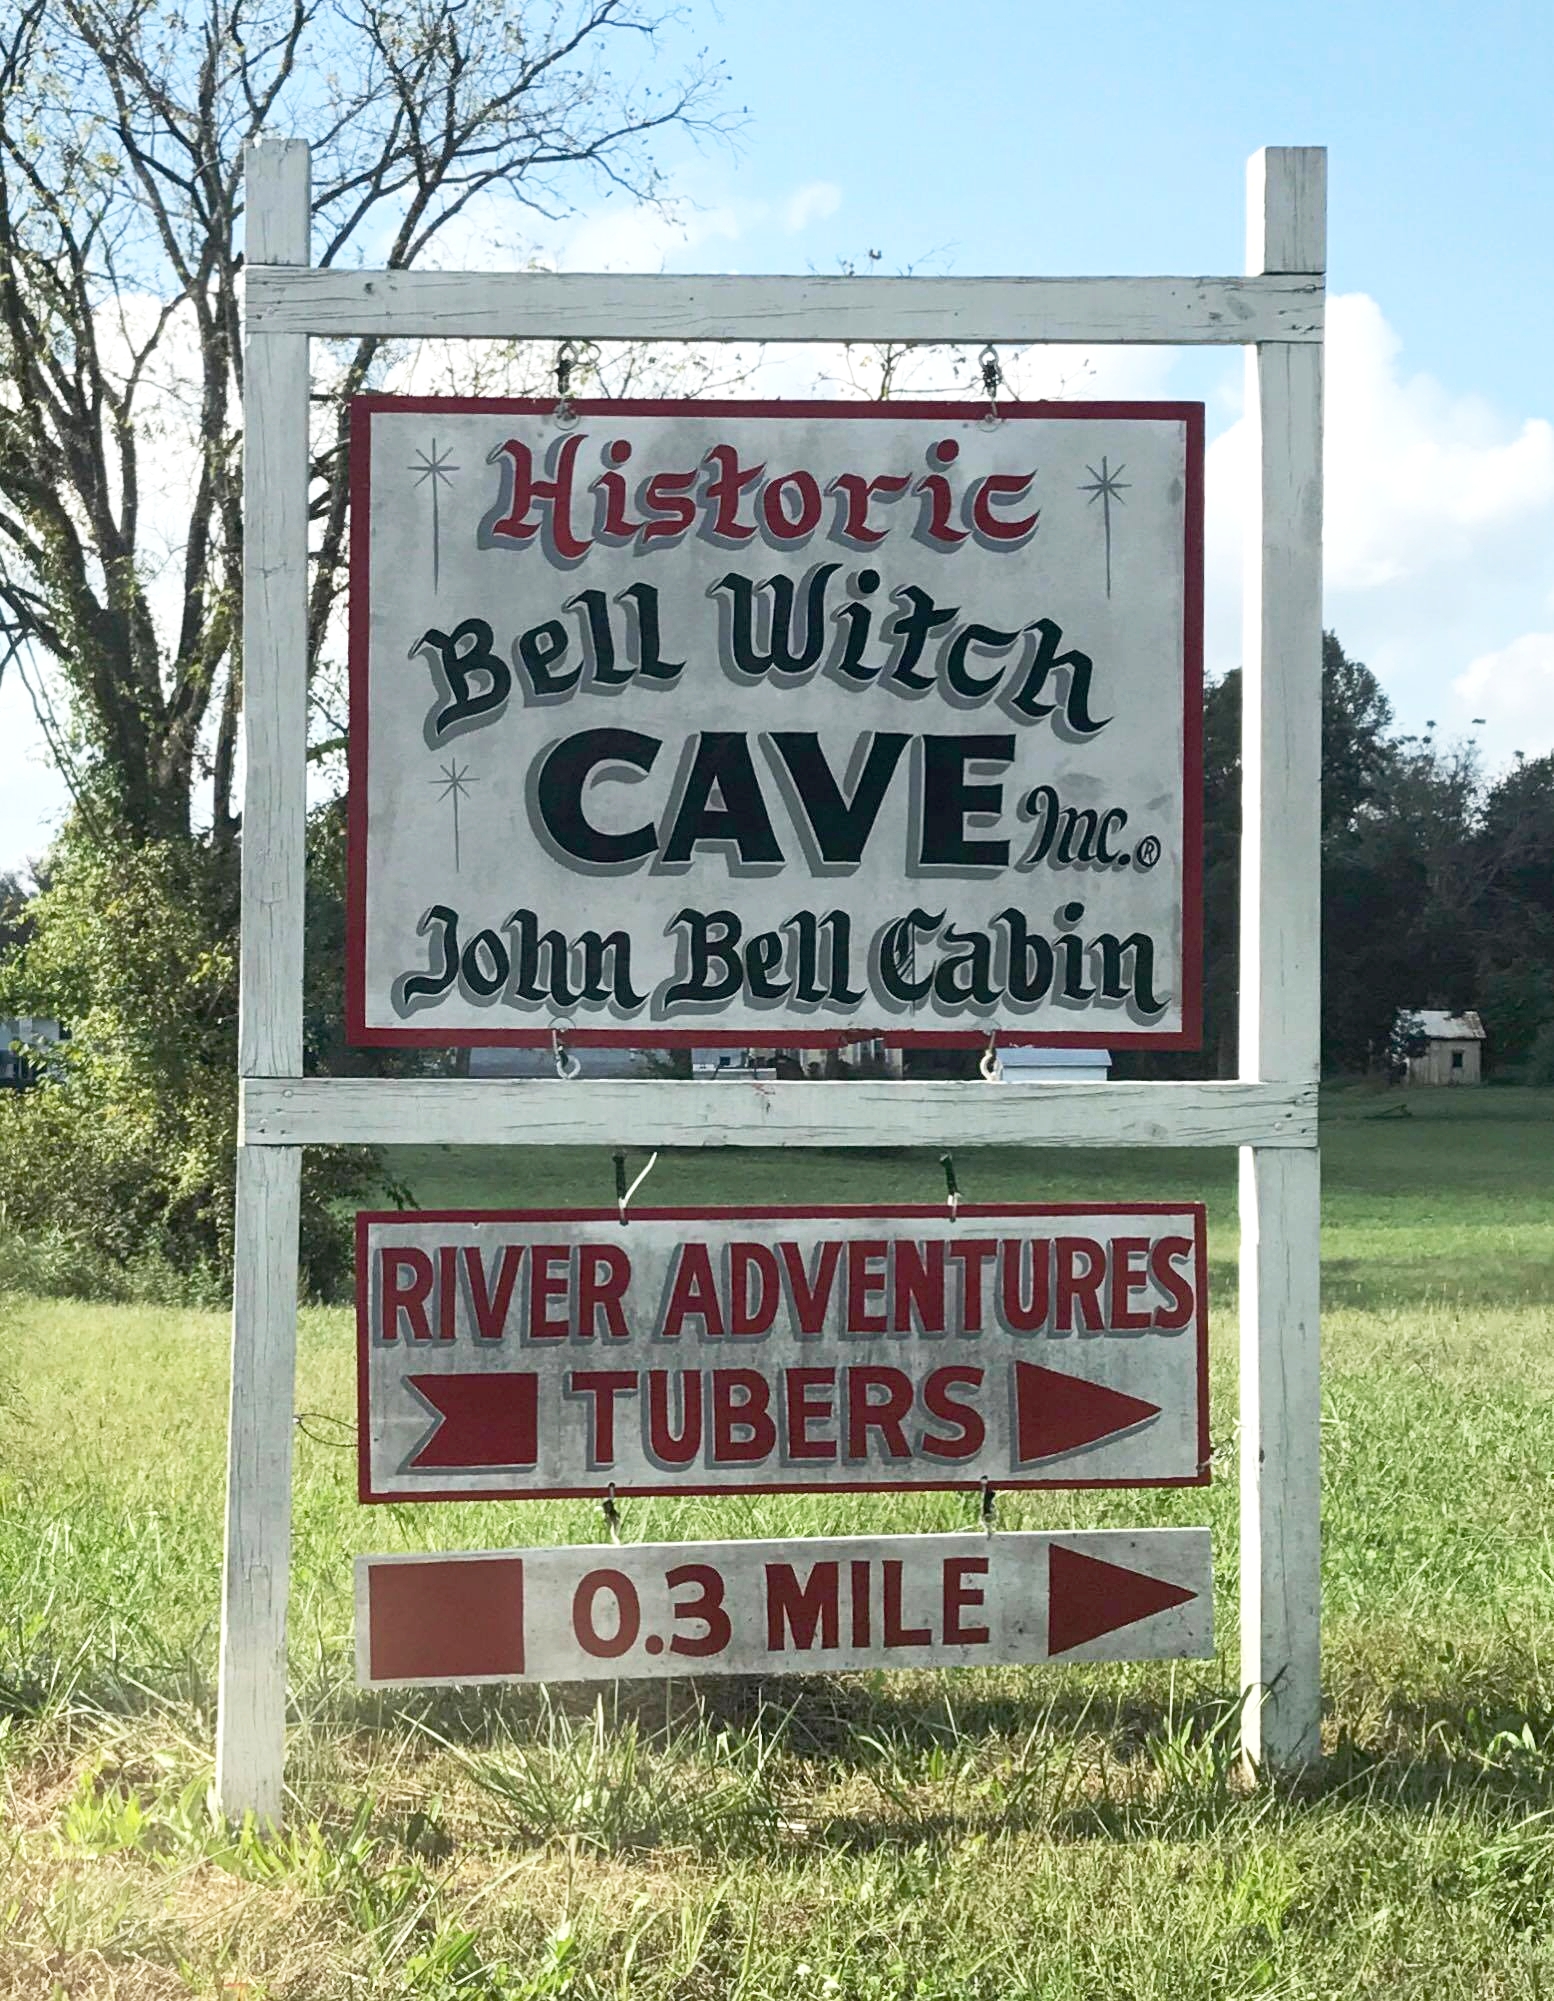   Photos of the Bell Witch Cave tour courtesy of listener Liz Shadbolt  